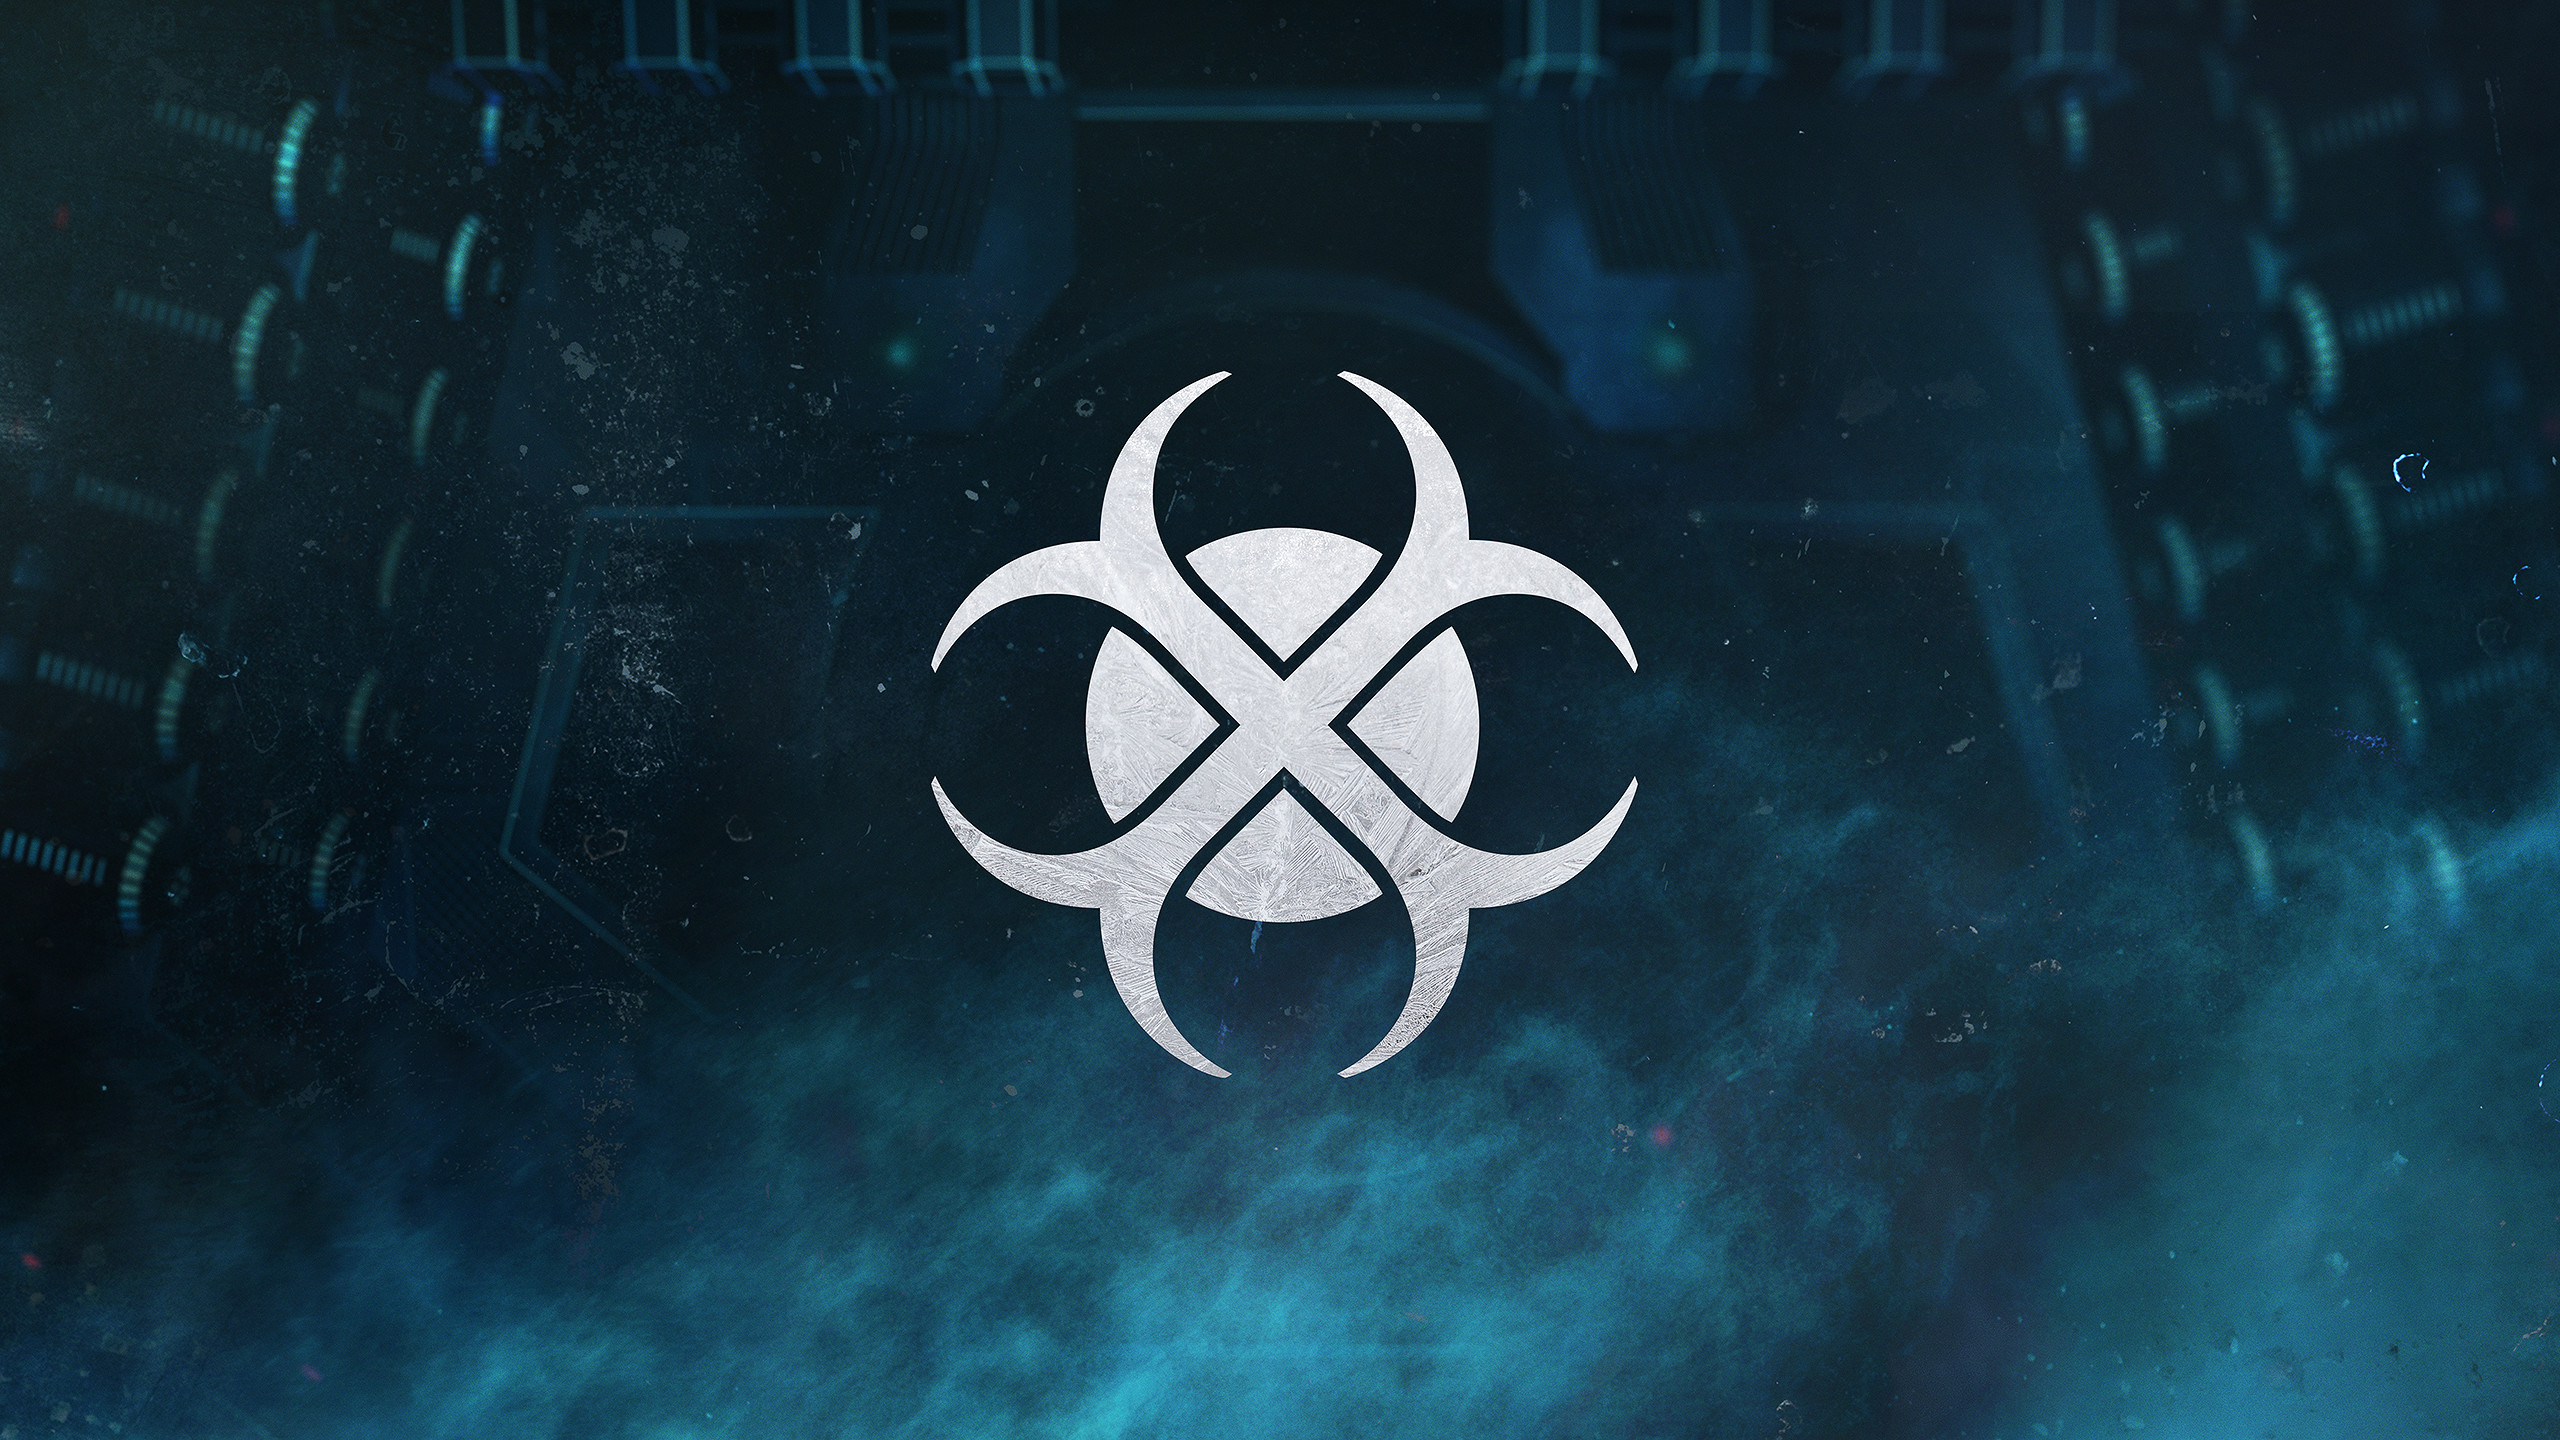 Excision Wallpaper.